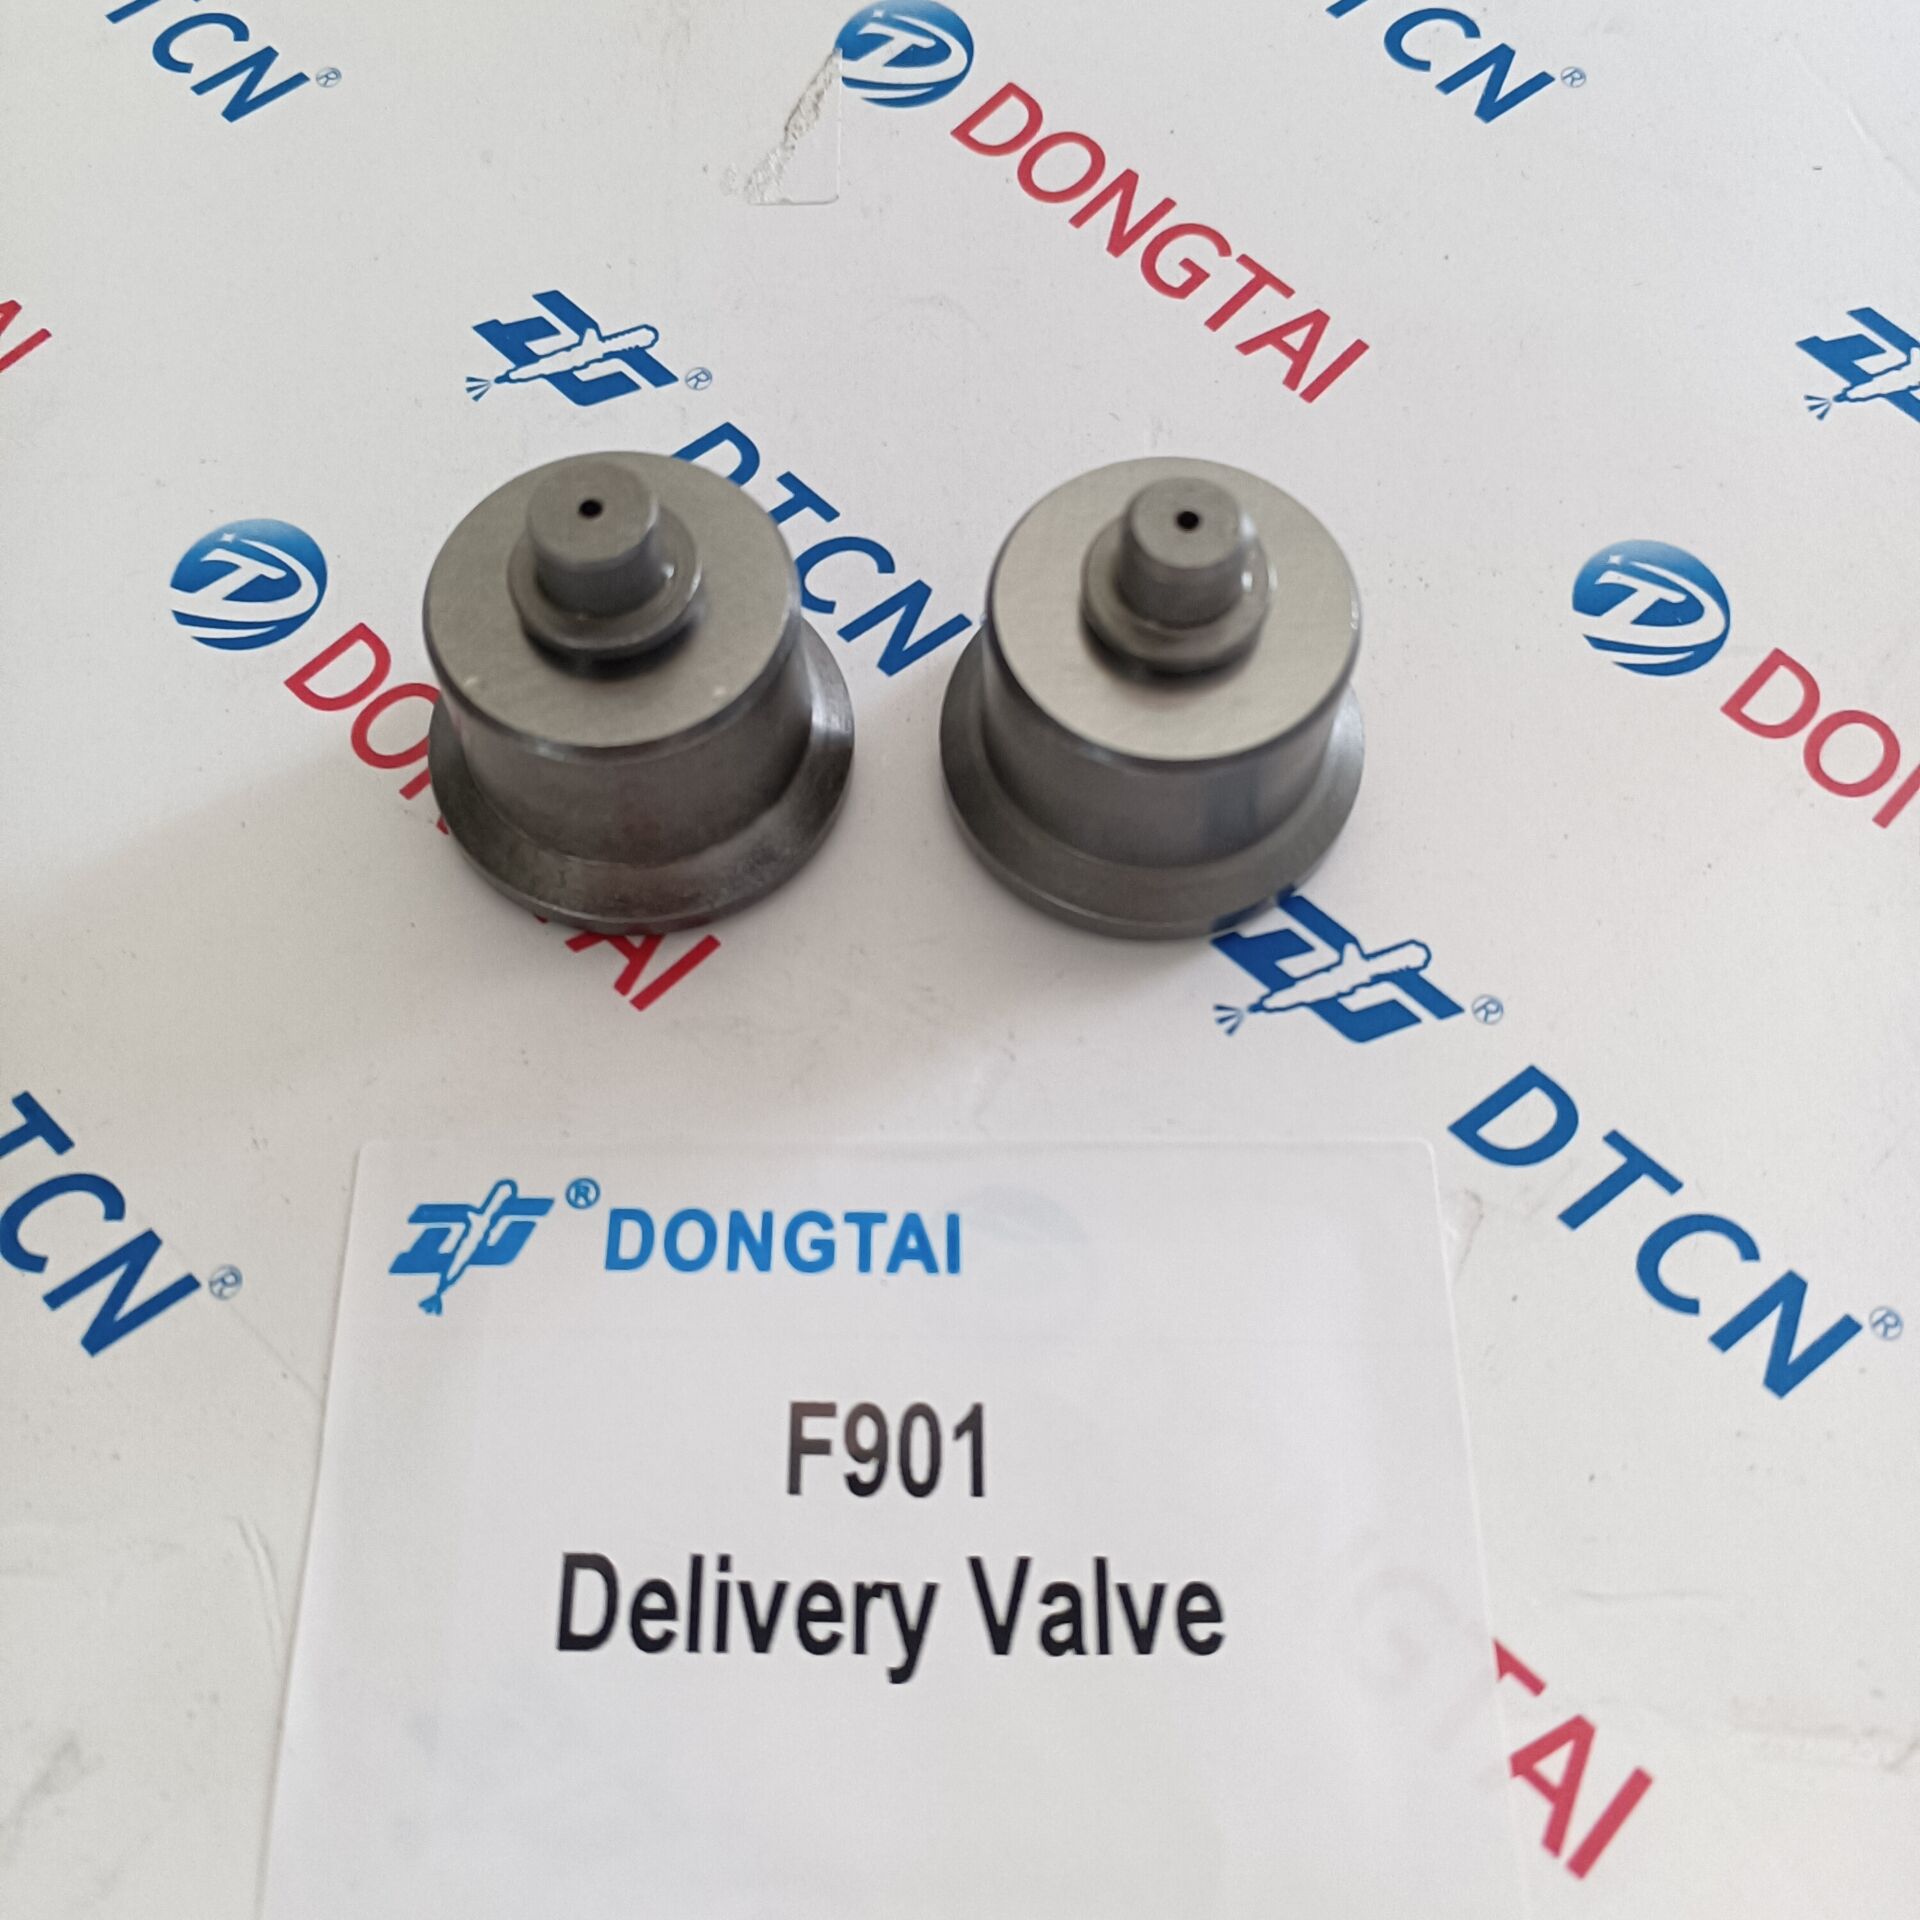 Delivery Valve F901